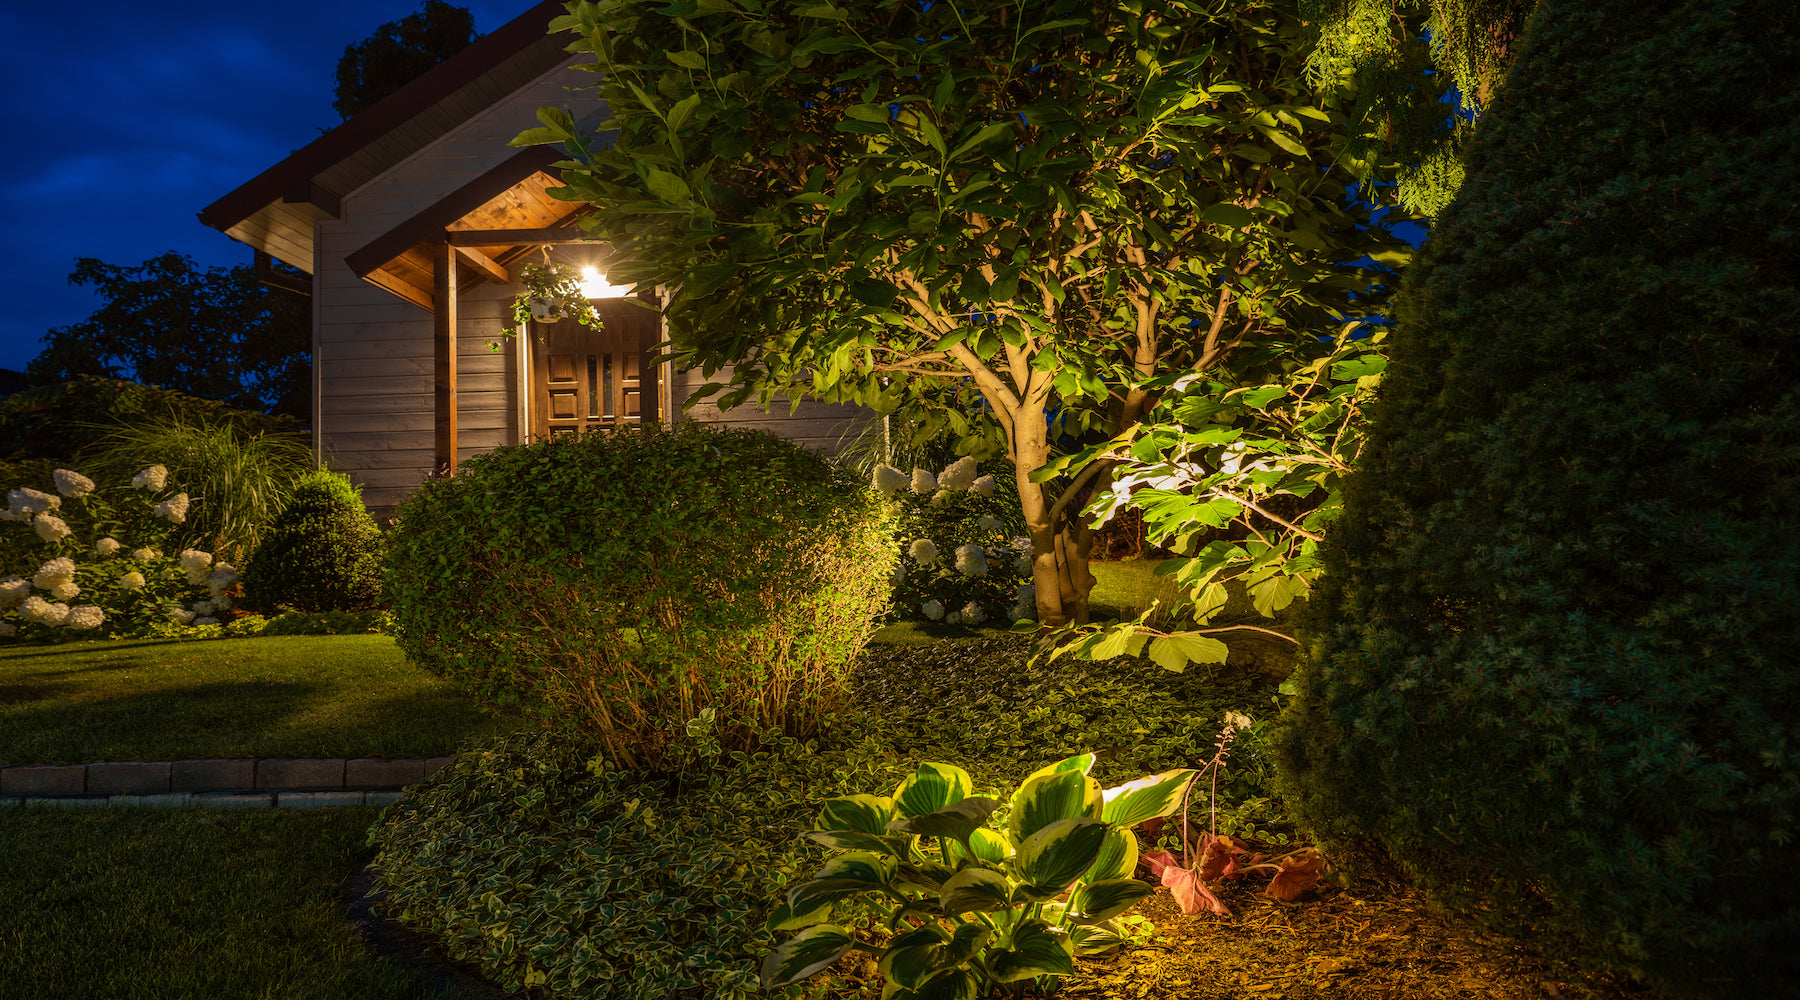 Yard lighting installed in garden at the back of a house illuminating landscaping